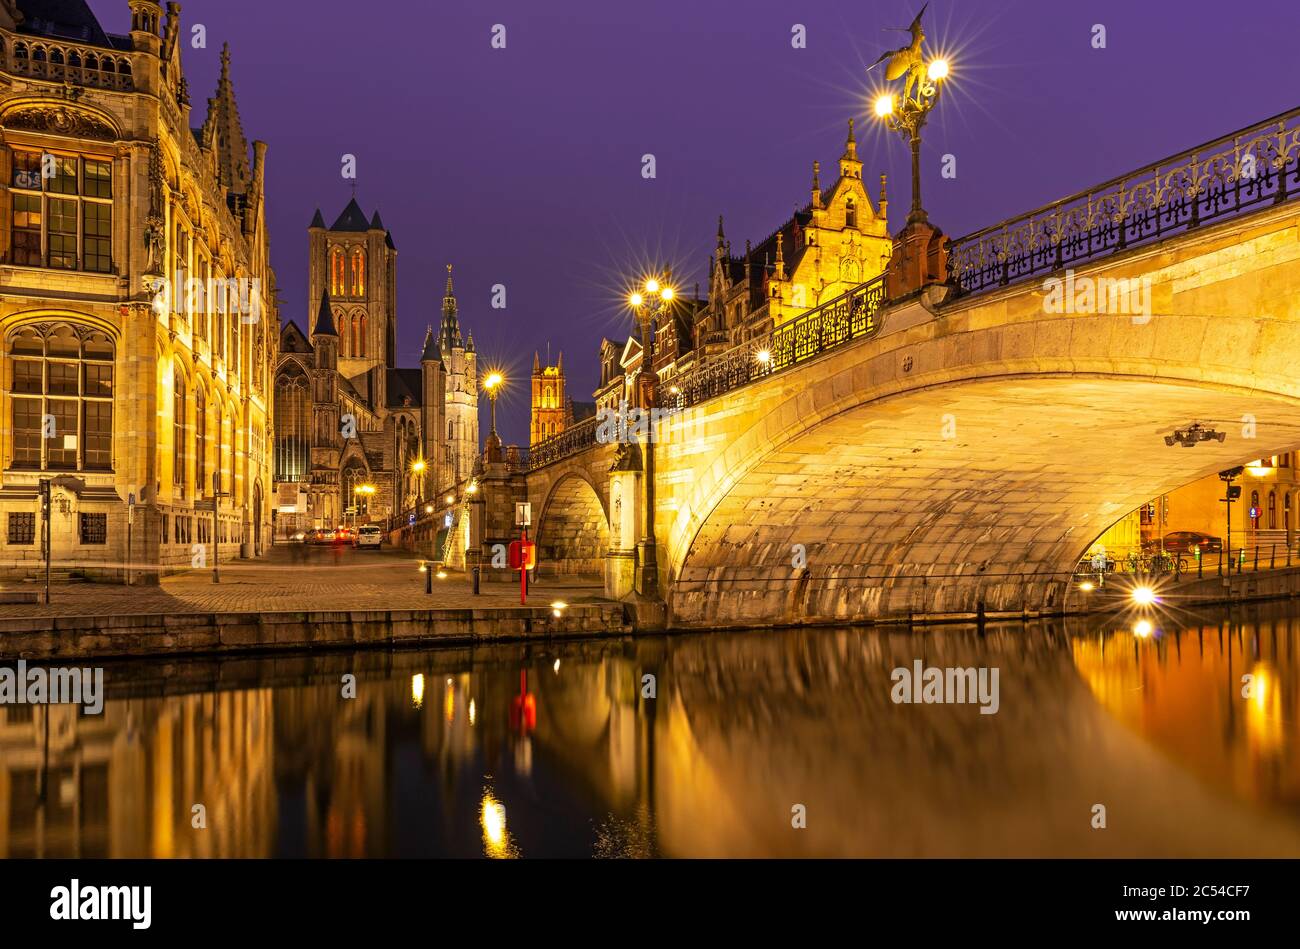 The Saint Michael Bridge and the belfry tower of Gent (Ghent) with a reflection in the Leie river by the Graslei at night, East Flanders, Belgium. Stock Photo